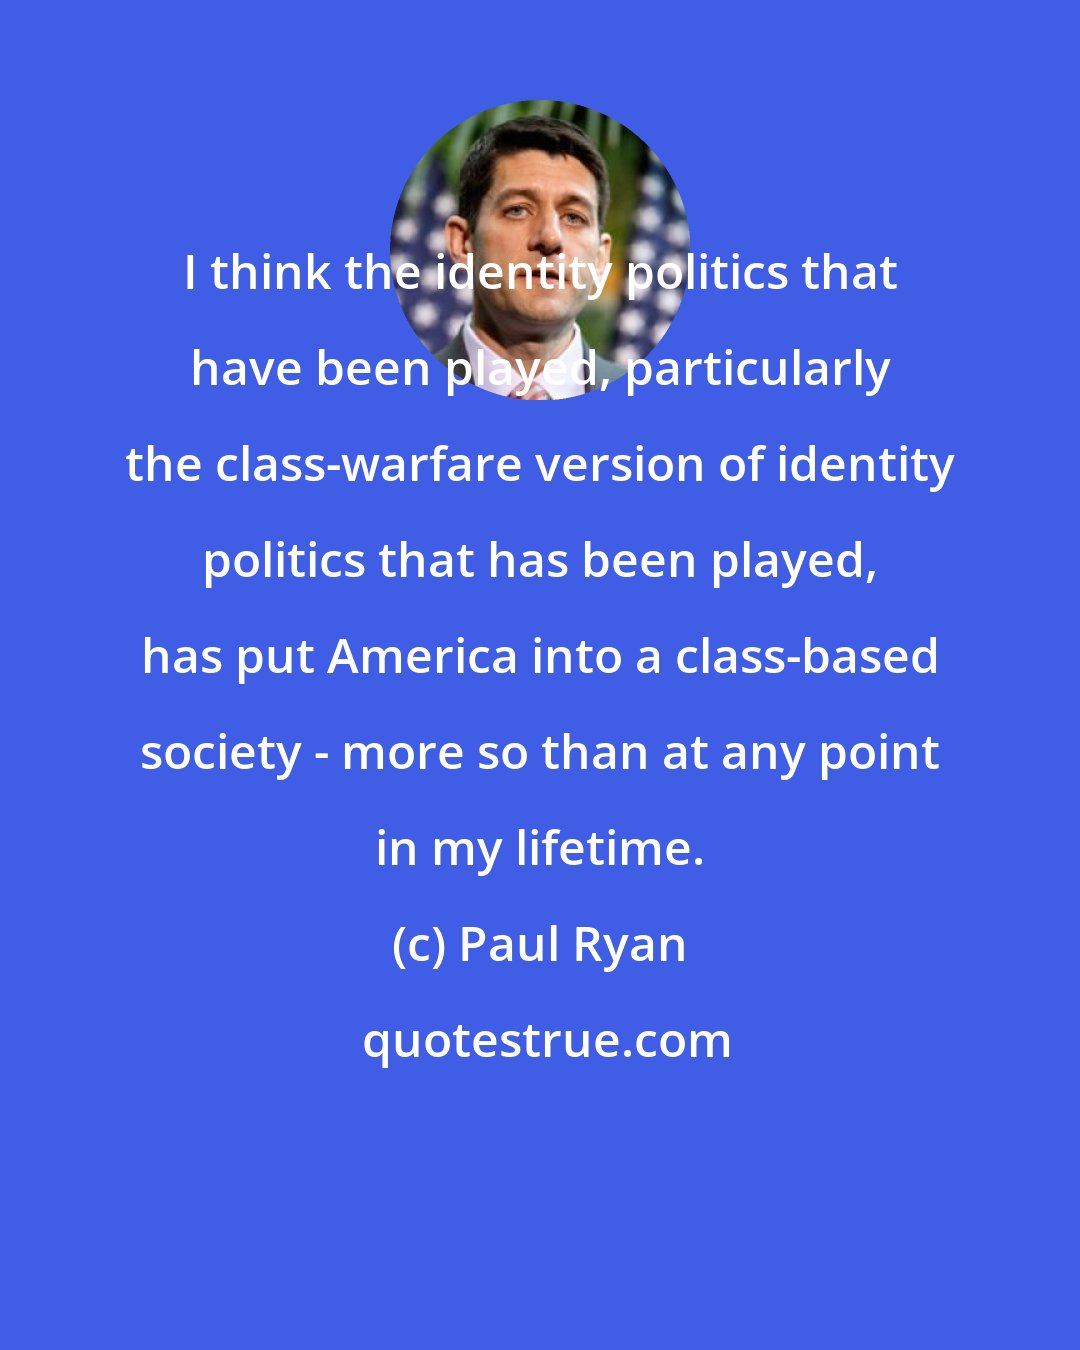 Paul Ryan: I think the identity politics that have been played, particularly the class-warfare version of identity politics that has been played, has put America into a class-based society - more so than at any point in my lifetime.